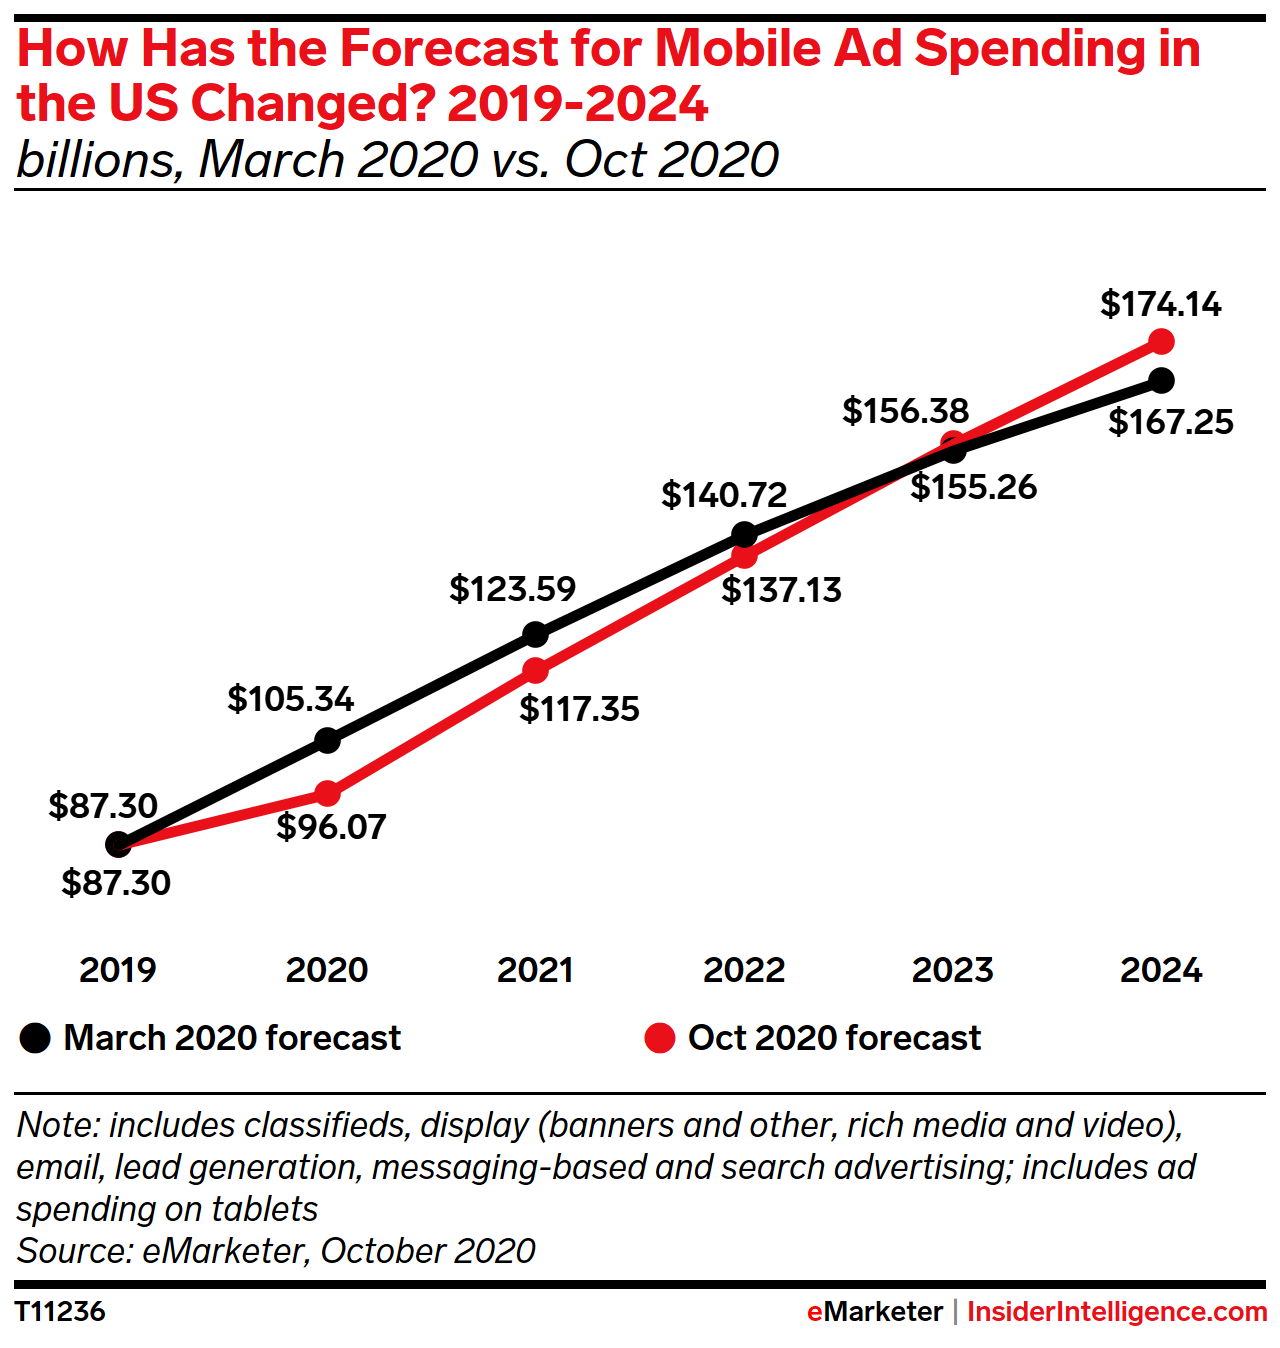 How Has the Mobile Ad Spending Forecast in the US Changed? 2019-2024 (billions)